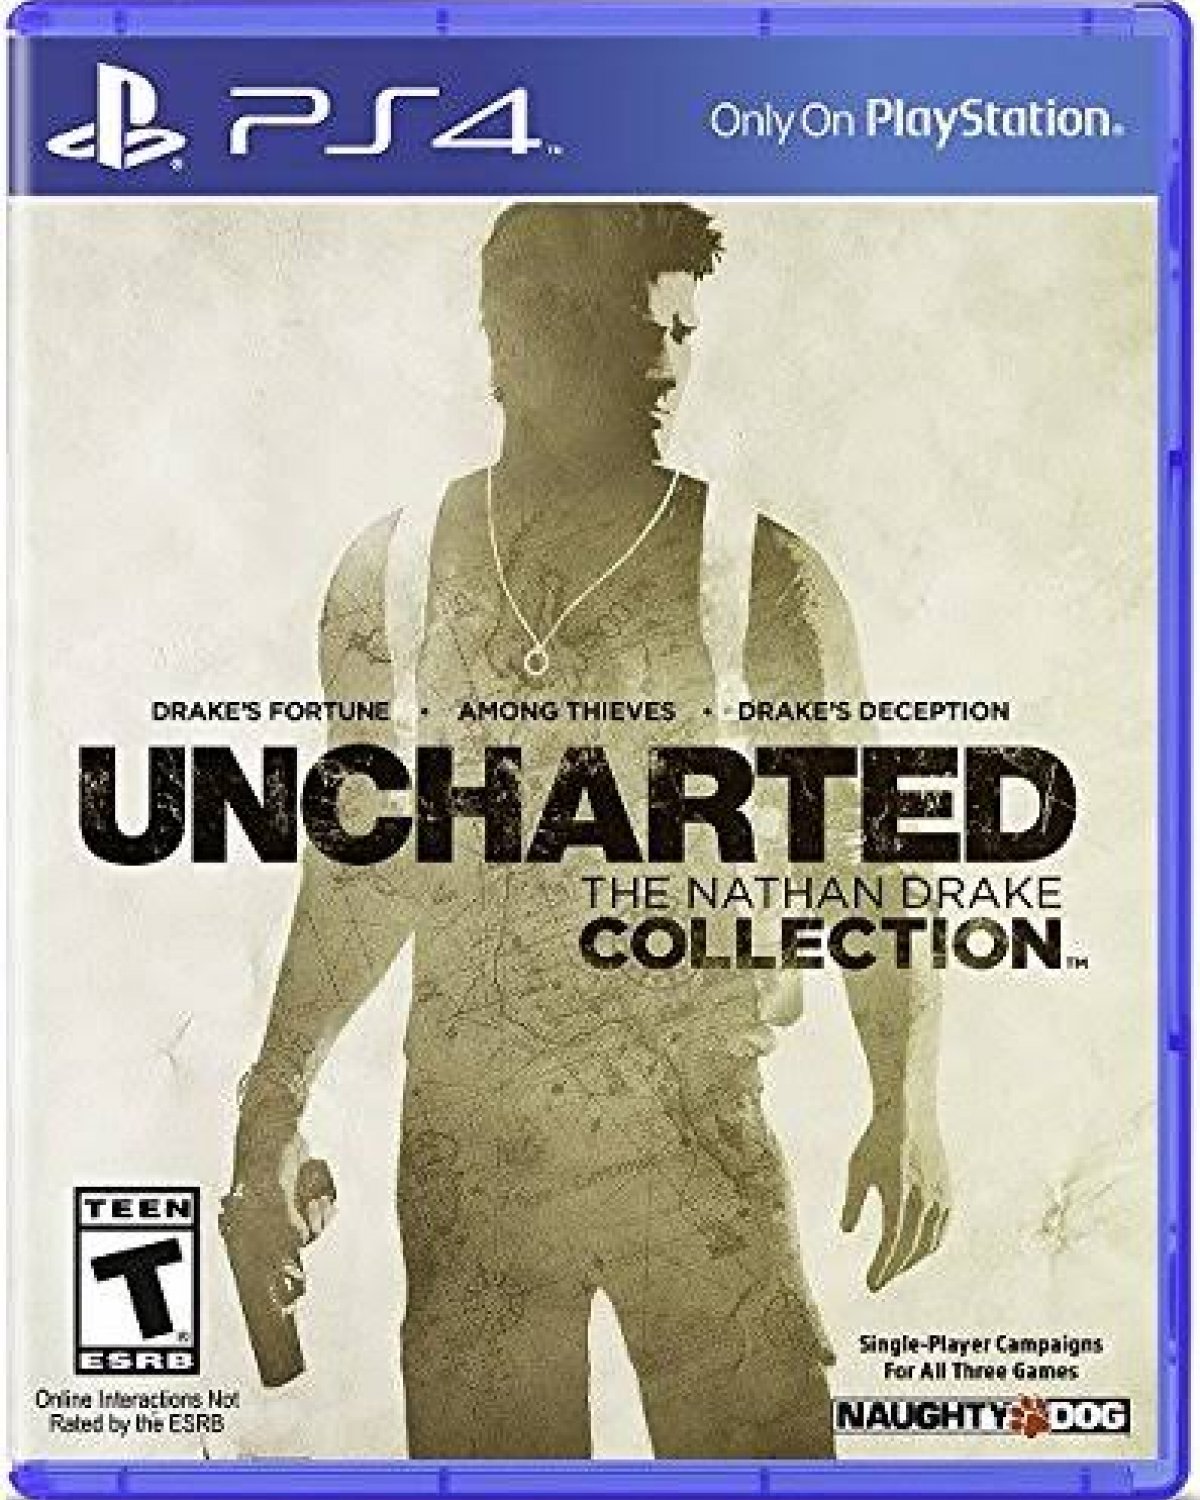 UNCHARTED™ The Nathan Drake Collection